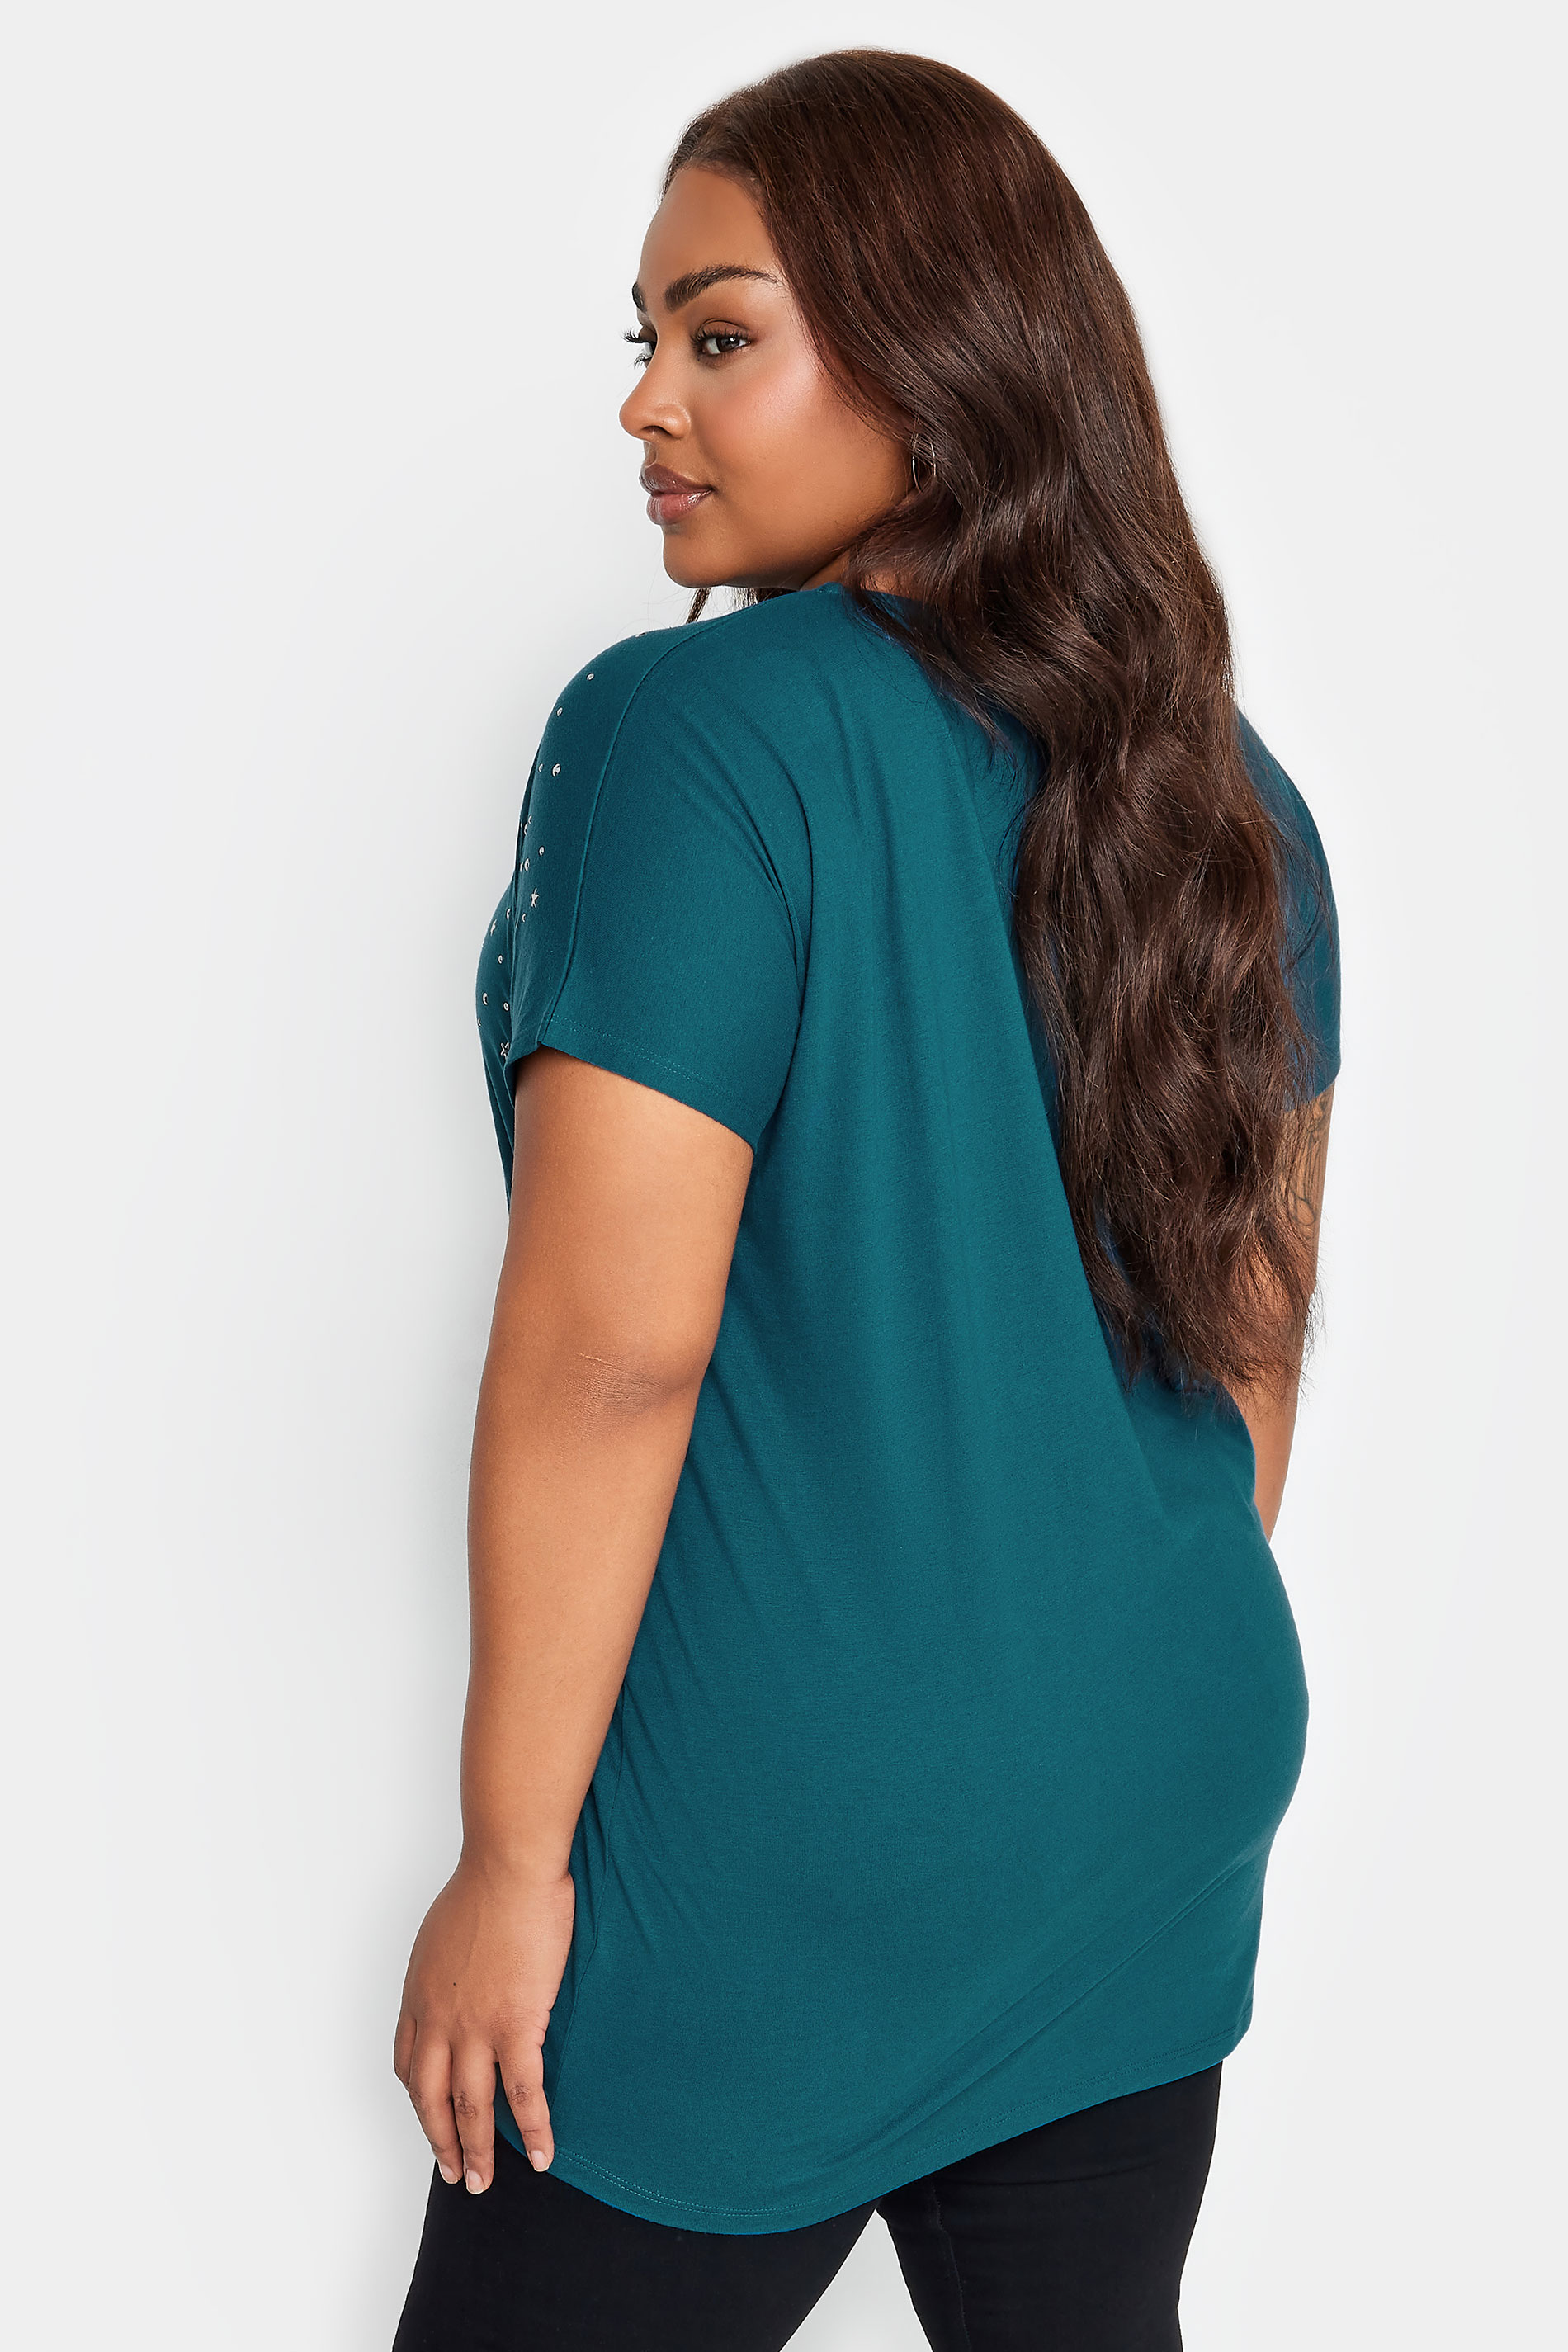 YOURS Plus Size Teal Blue Embellished Front T-Shirt | Yours Clothing 3